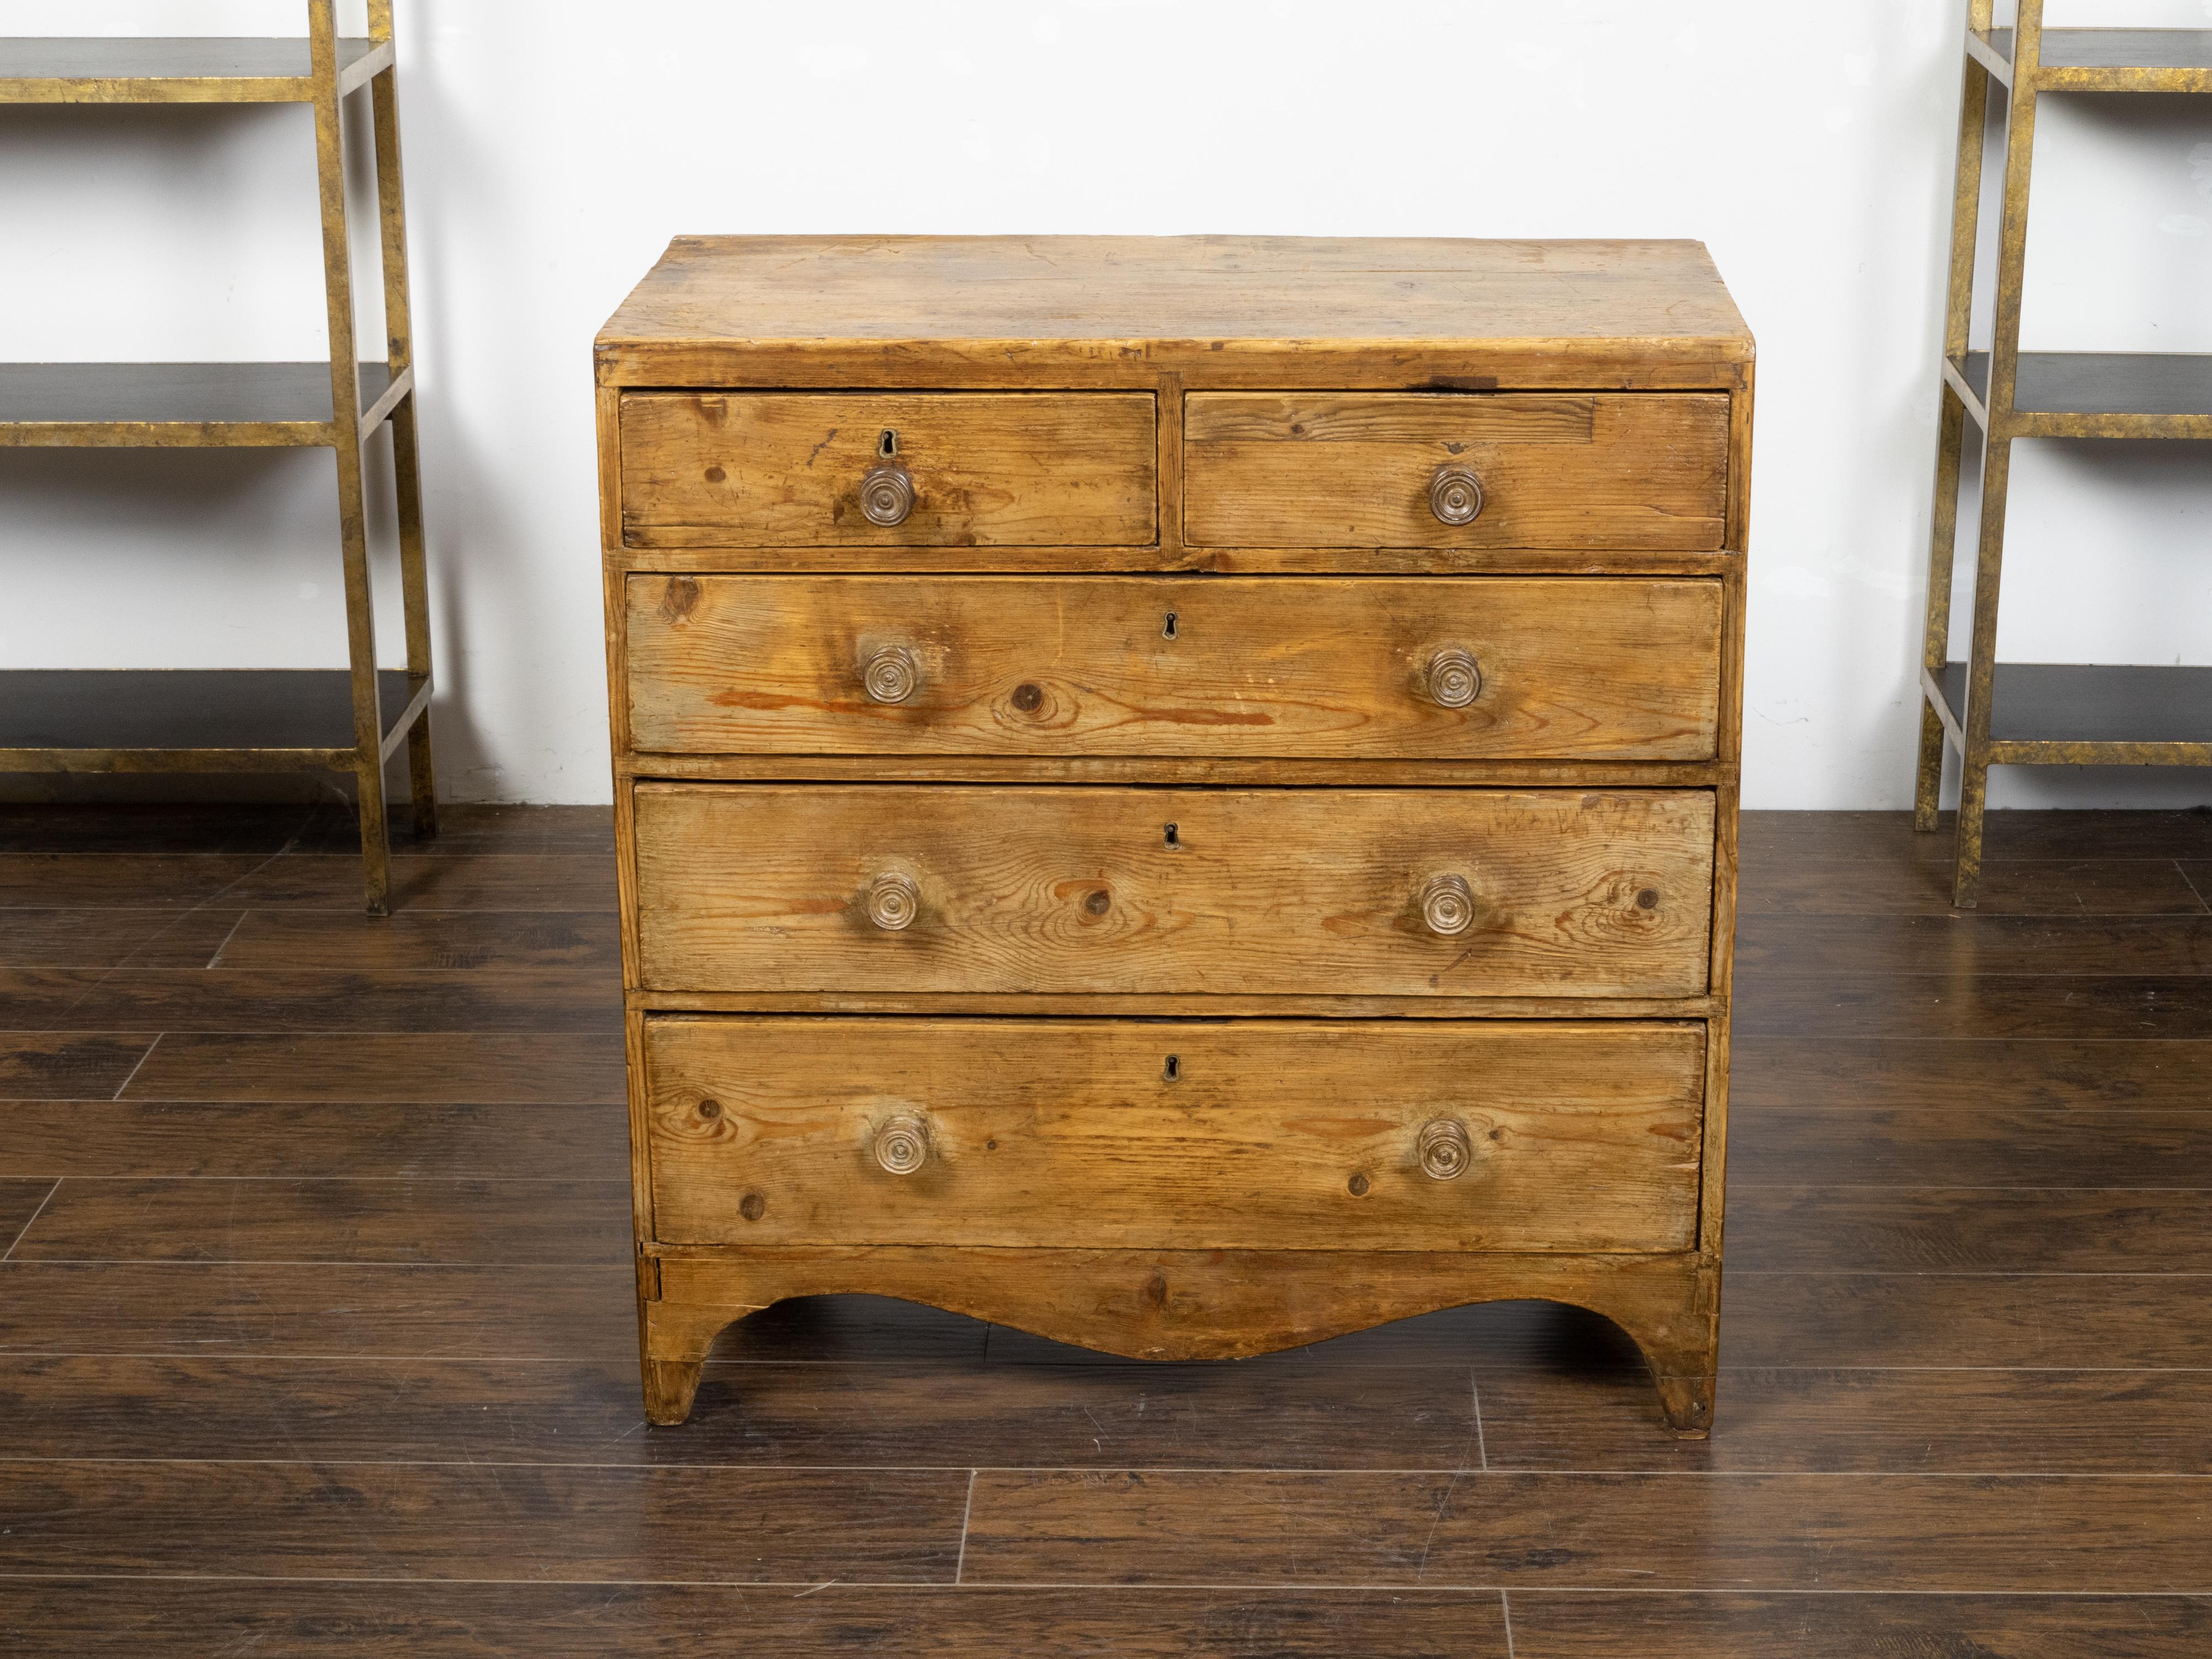 An English Regency period pine chest from the early 19th century, with five graduated drawers, turned wooden pulls, valanced skirt and distressed patina. Created in England during the Regency period in the early years of the 19th century, this pine